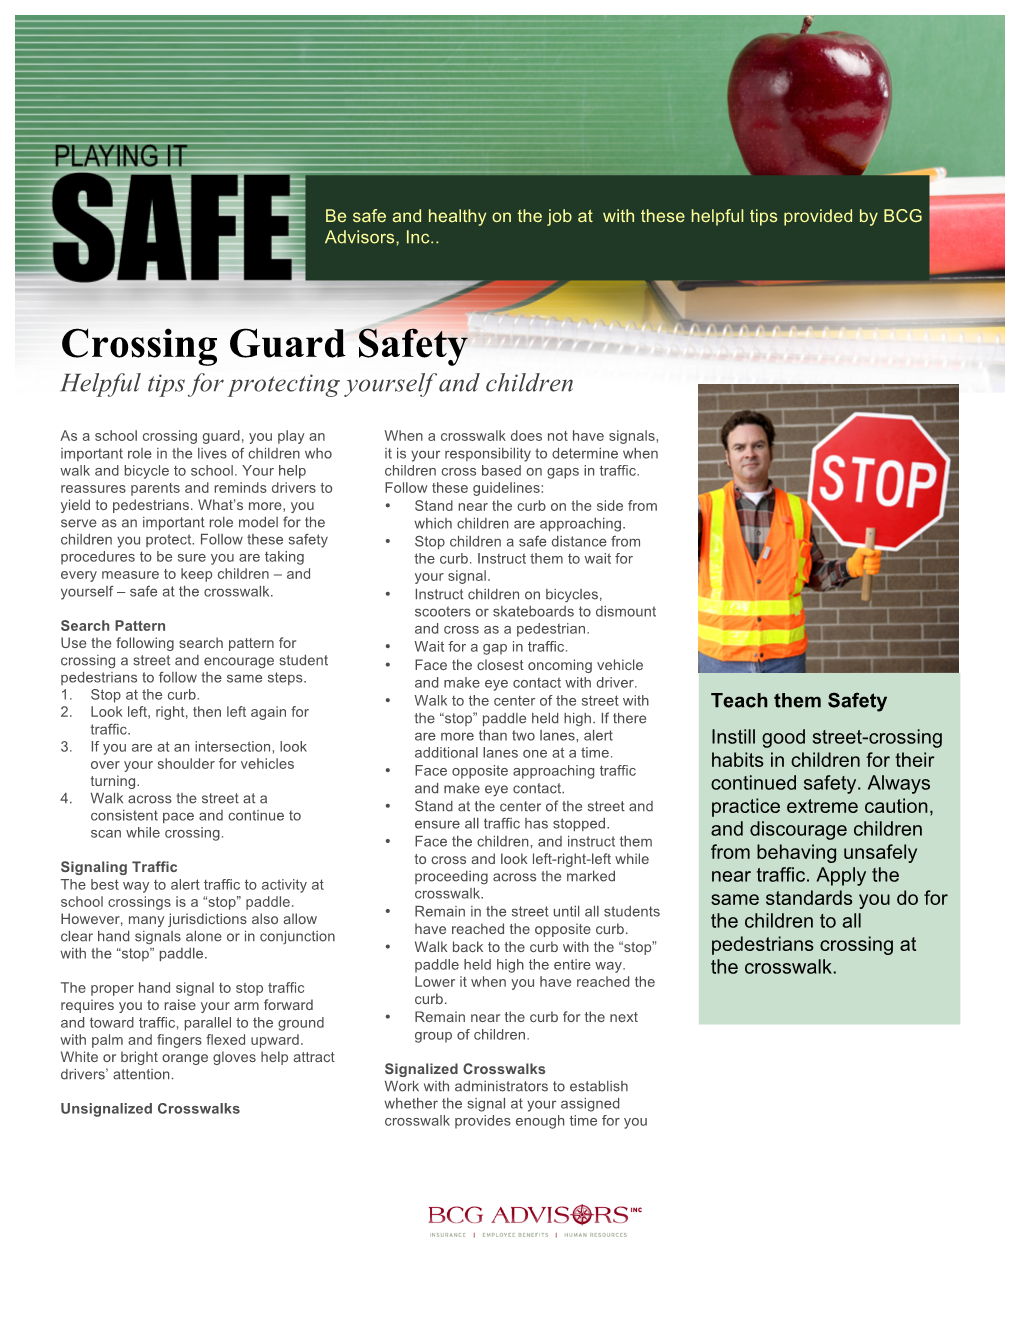 Crossing Guard Safety Helpful Tips for Protecting Yourself and Children